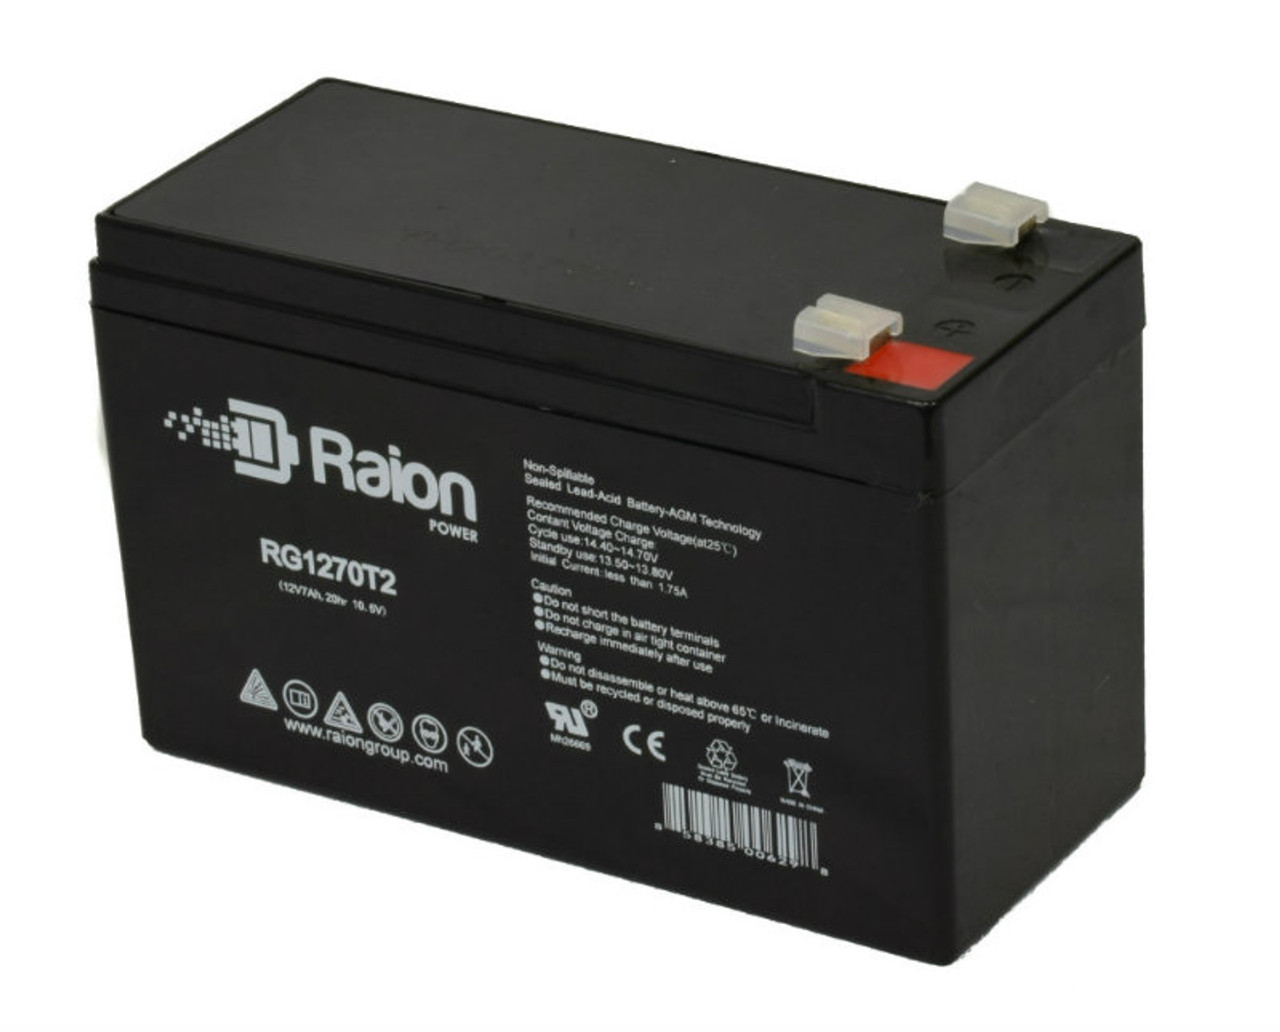 Raion Power Replacement 12V 7Ah RG1270T1 Fire Alarm Battery for Altronix AL400ULXR